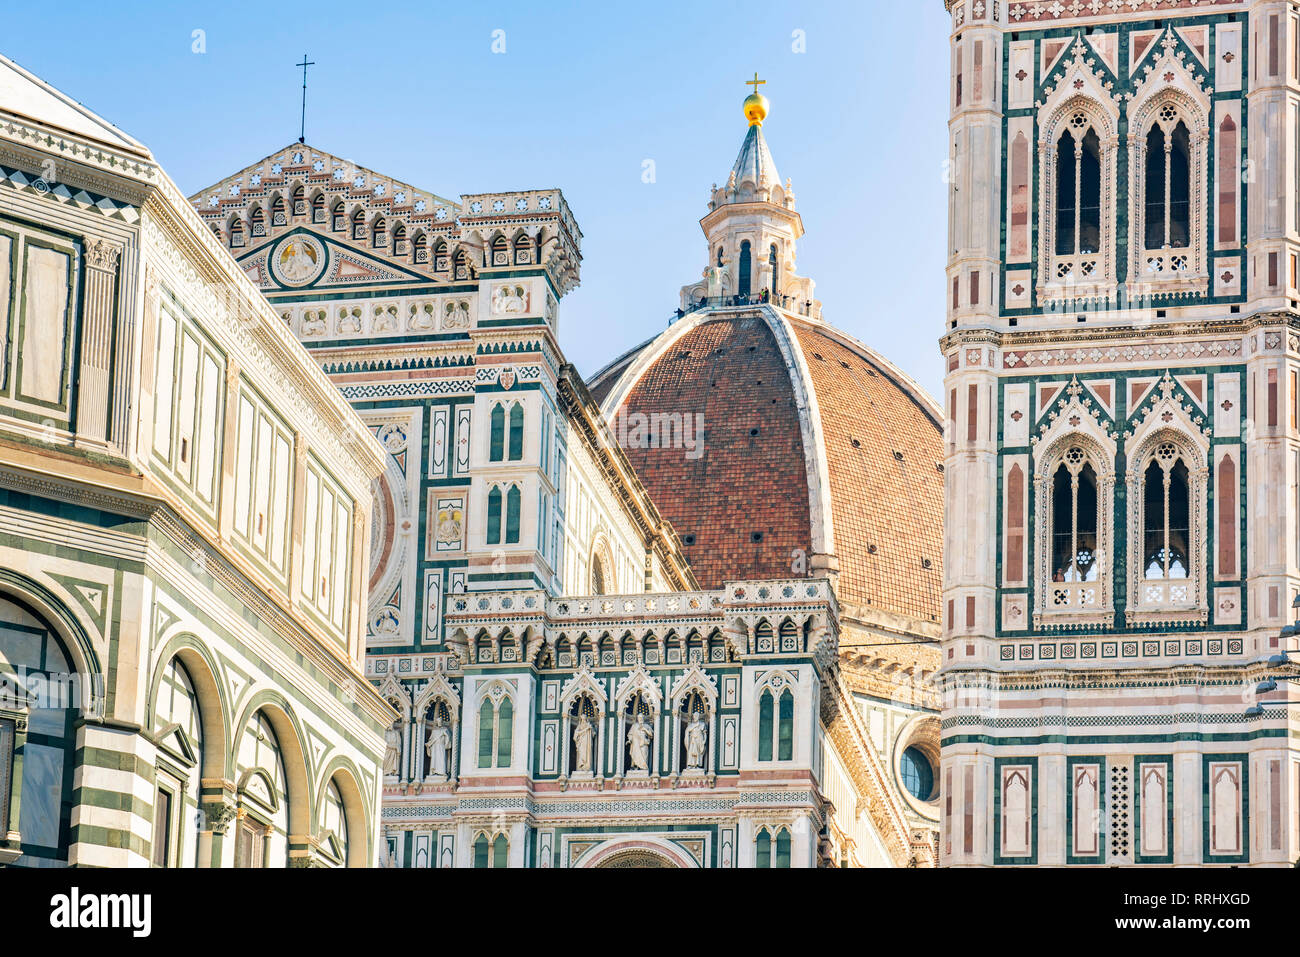 Florence Cathedral (Duomo), Piazza del Duomo, UNESCO World Heritage Site, Florence, Tuscany, Italy, Europe Stock Photo